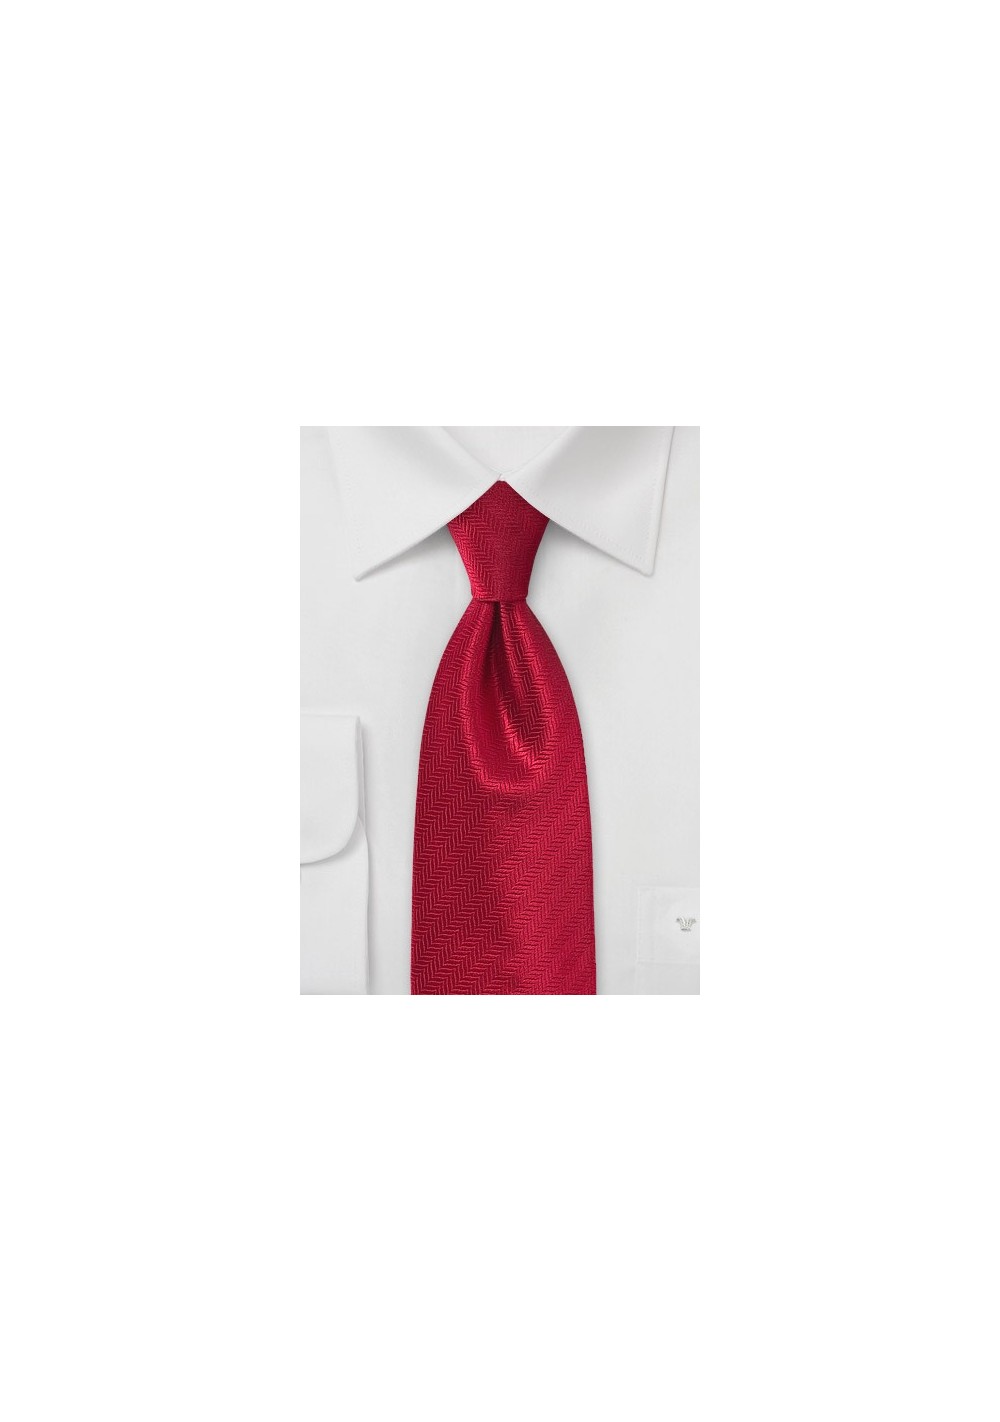 Feather Patterned Tie in Red